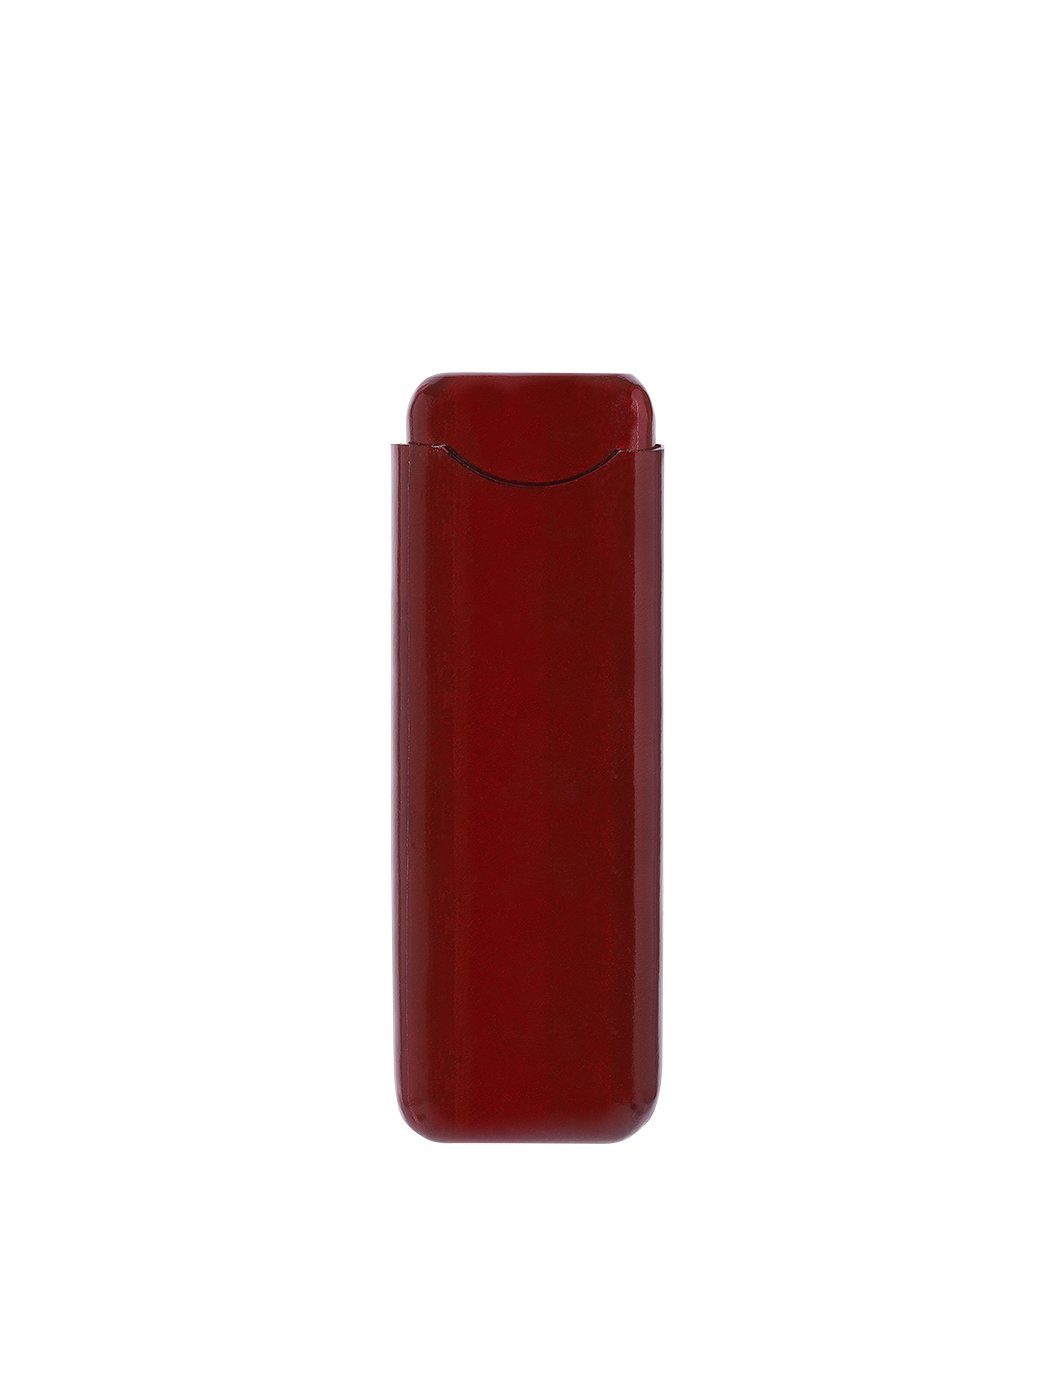 Pen Holder Wet Forming Leather Red